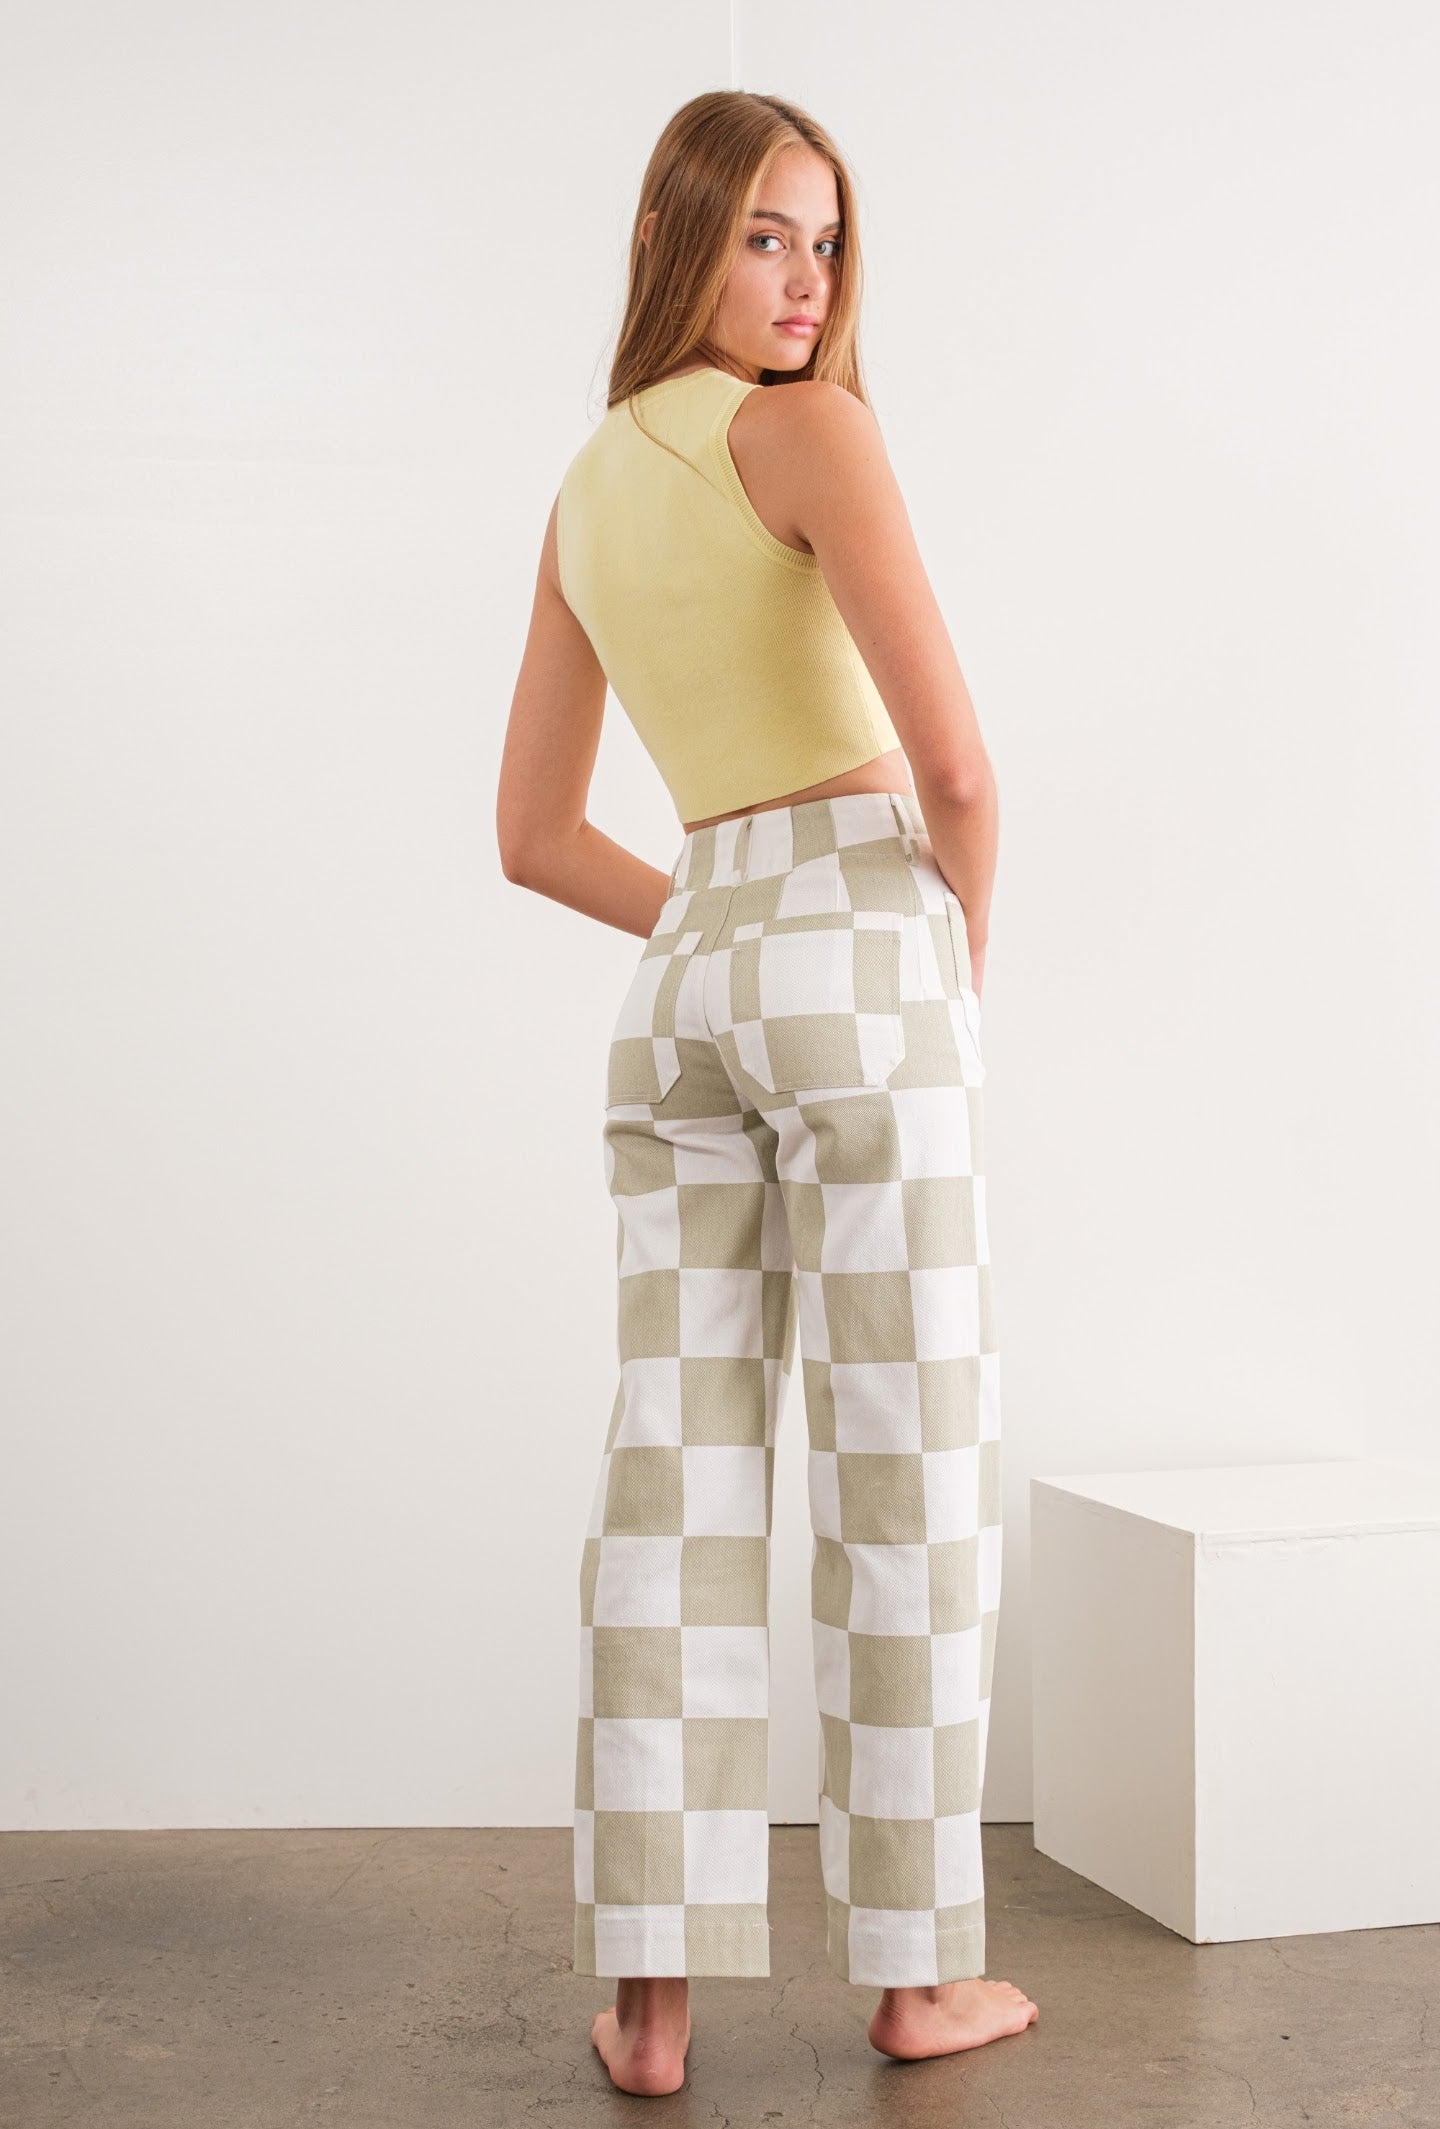 The Anansi Checkered Bottoms in Taupe